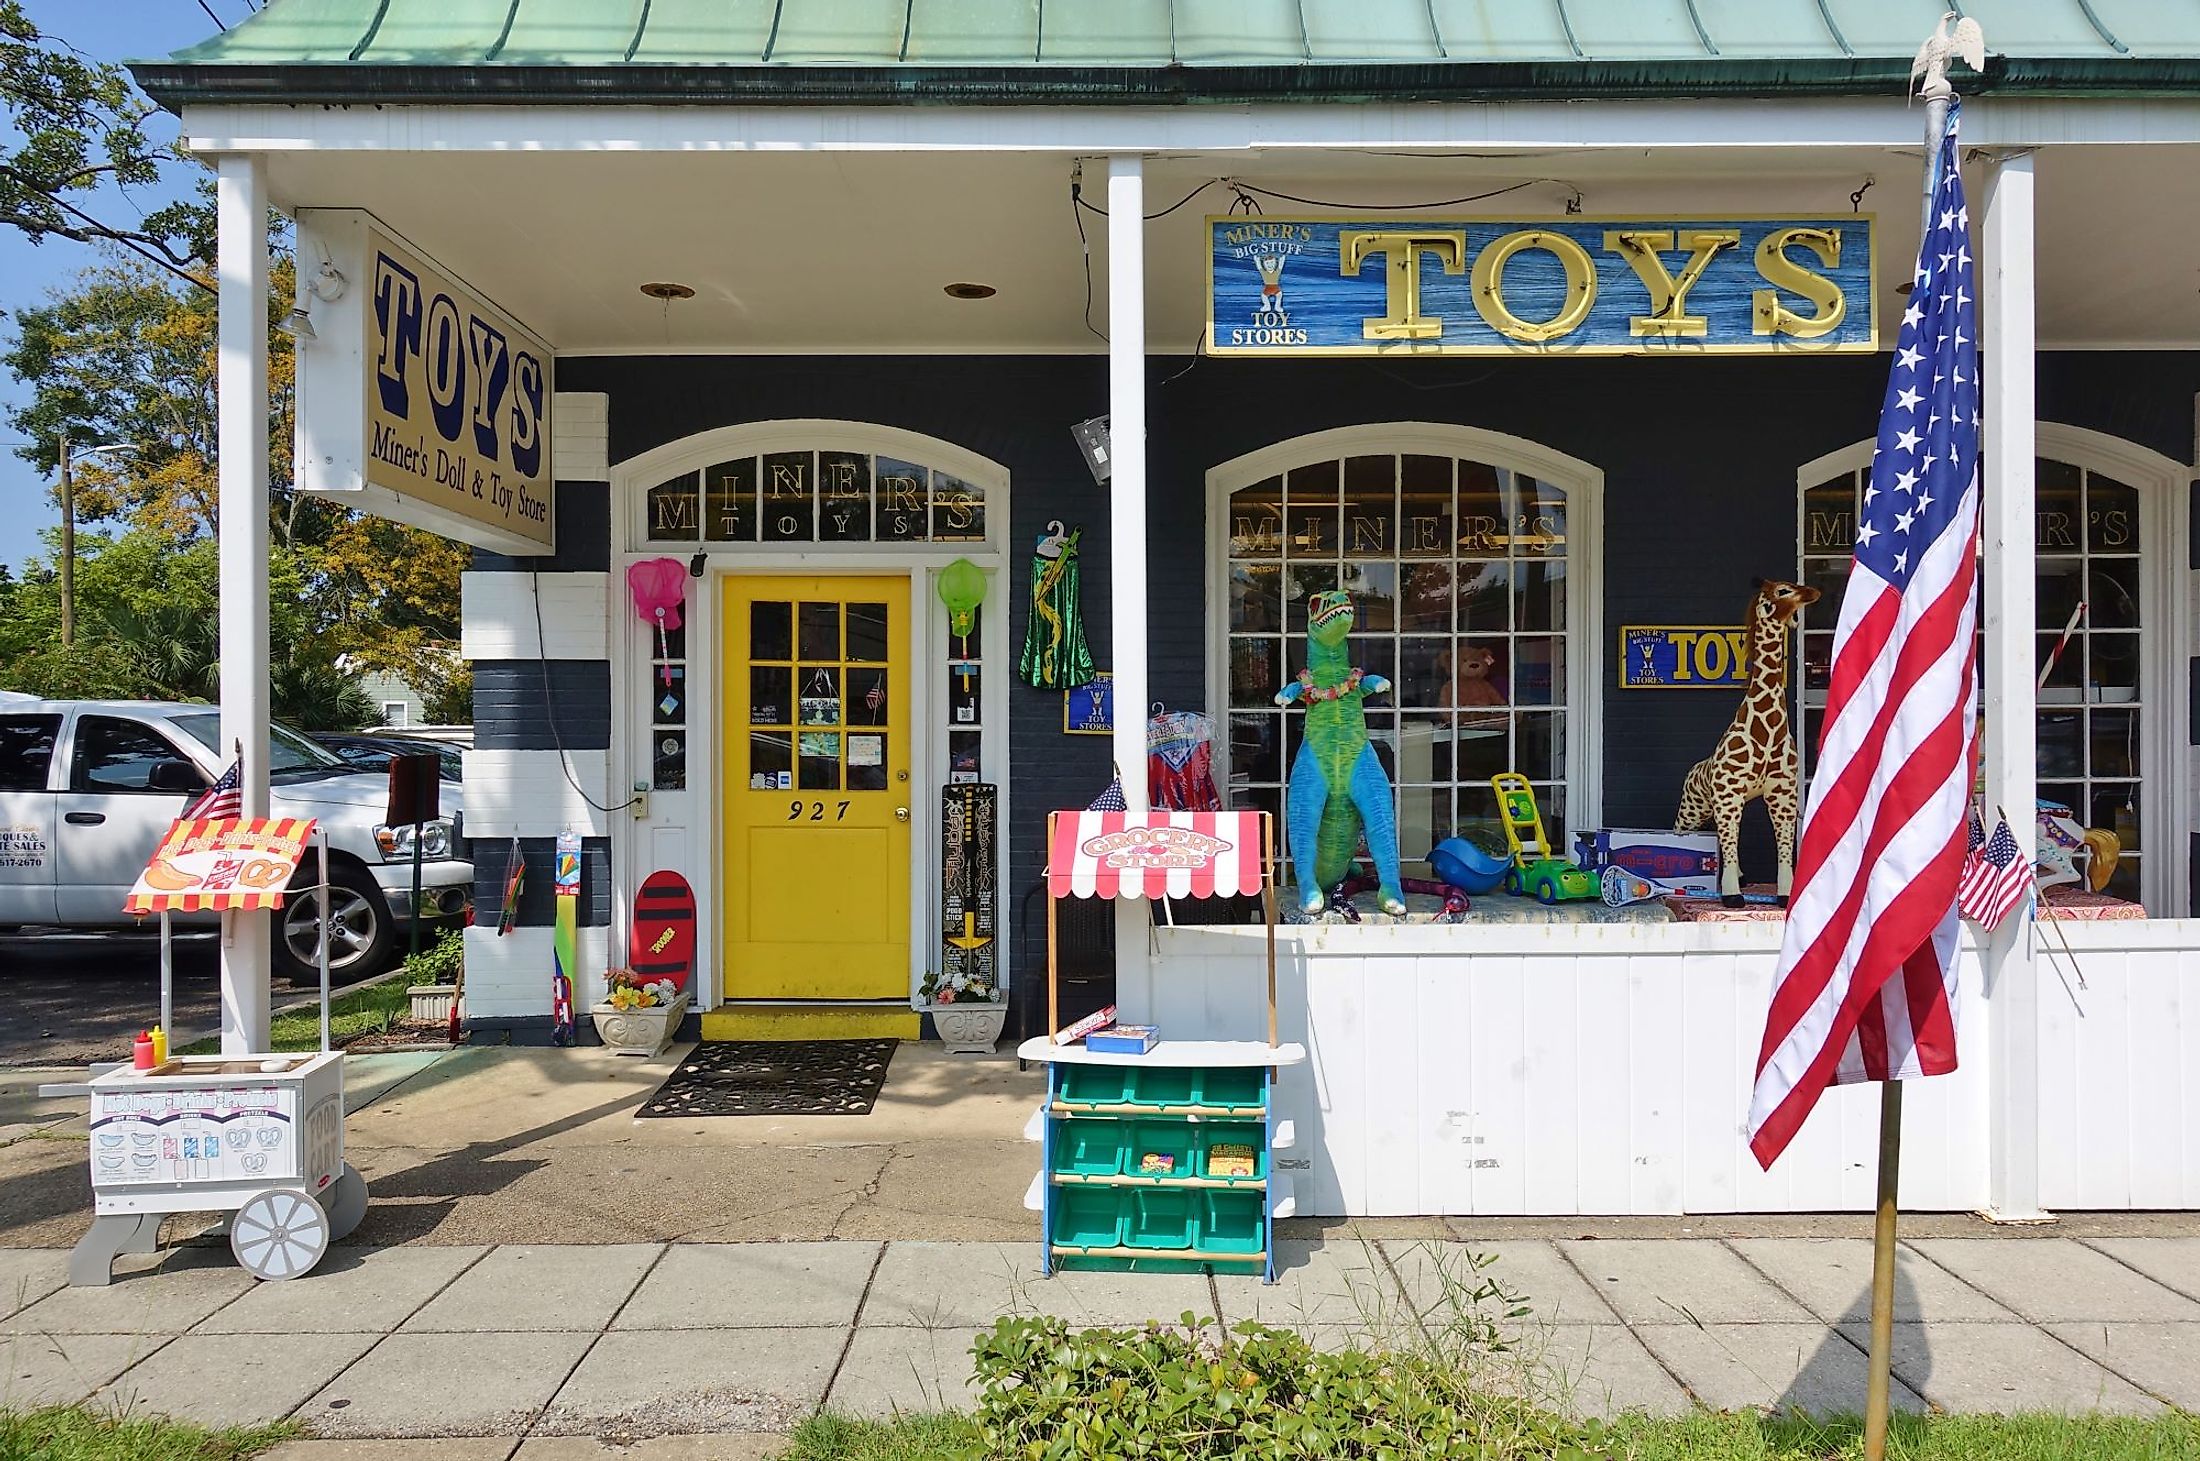 Miner's Doll & Toy Store in old downtown Ocean Springs, Mississippi. Editorial credit: EQRoy / Shutterstock.com